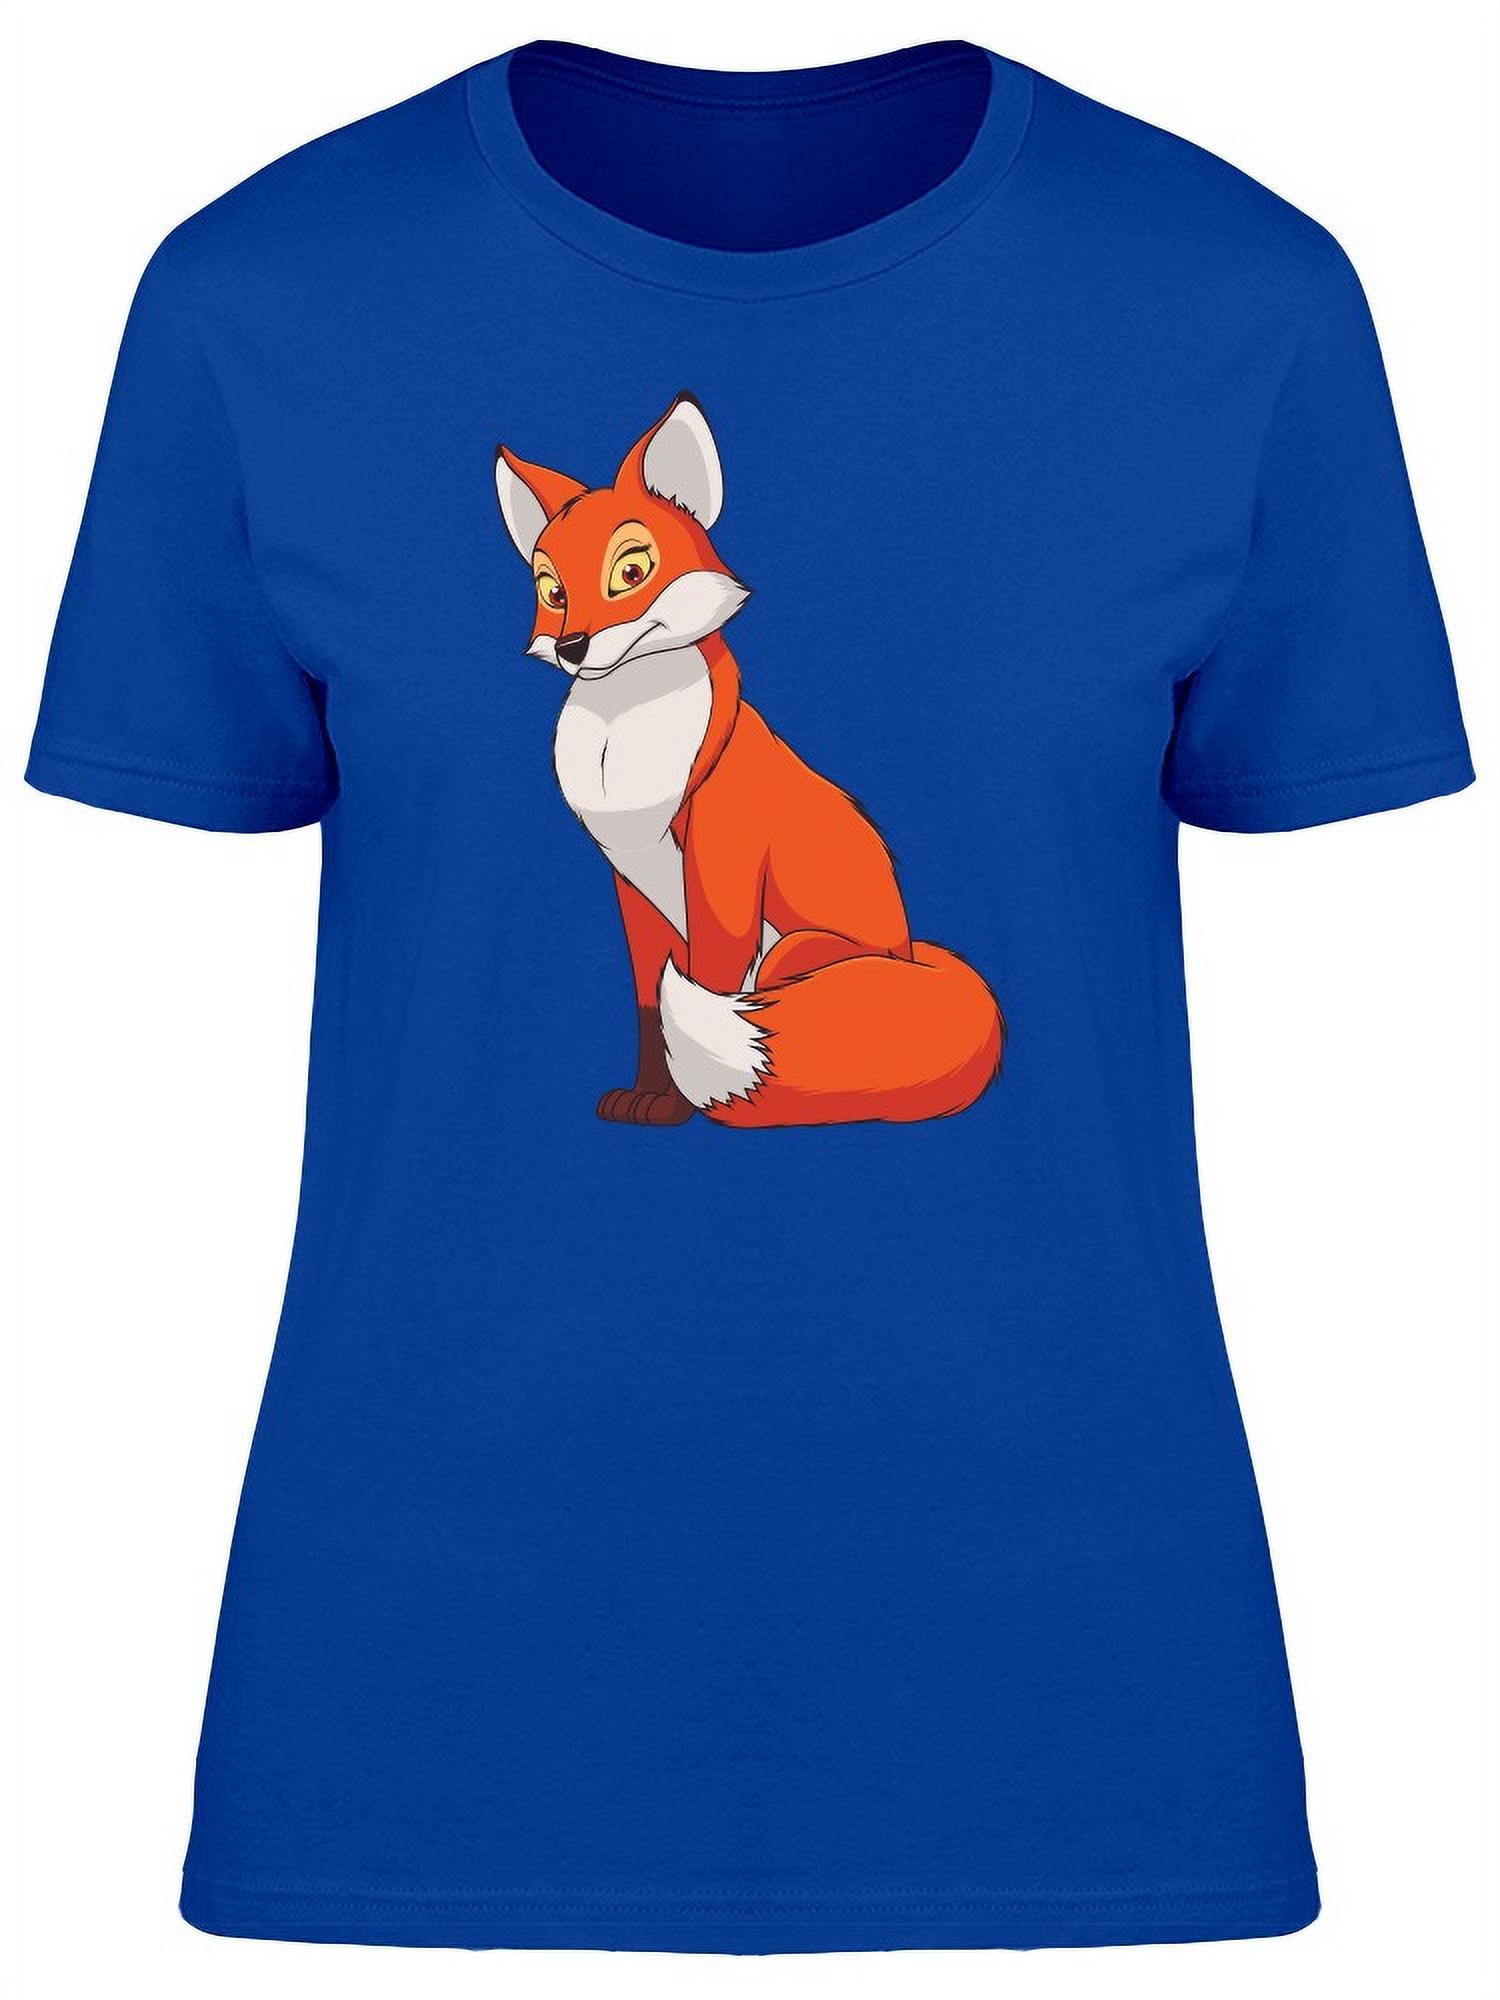 Cute Female Red Fox T-Shirt Women -Image by Shutterstock, Female x-Large - image 1 of 2